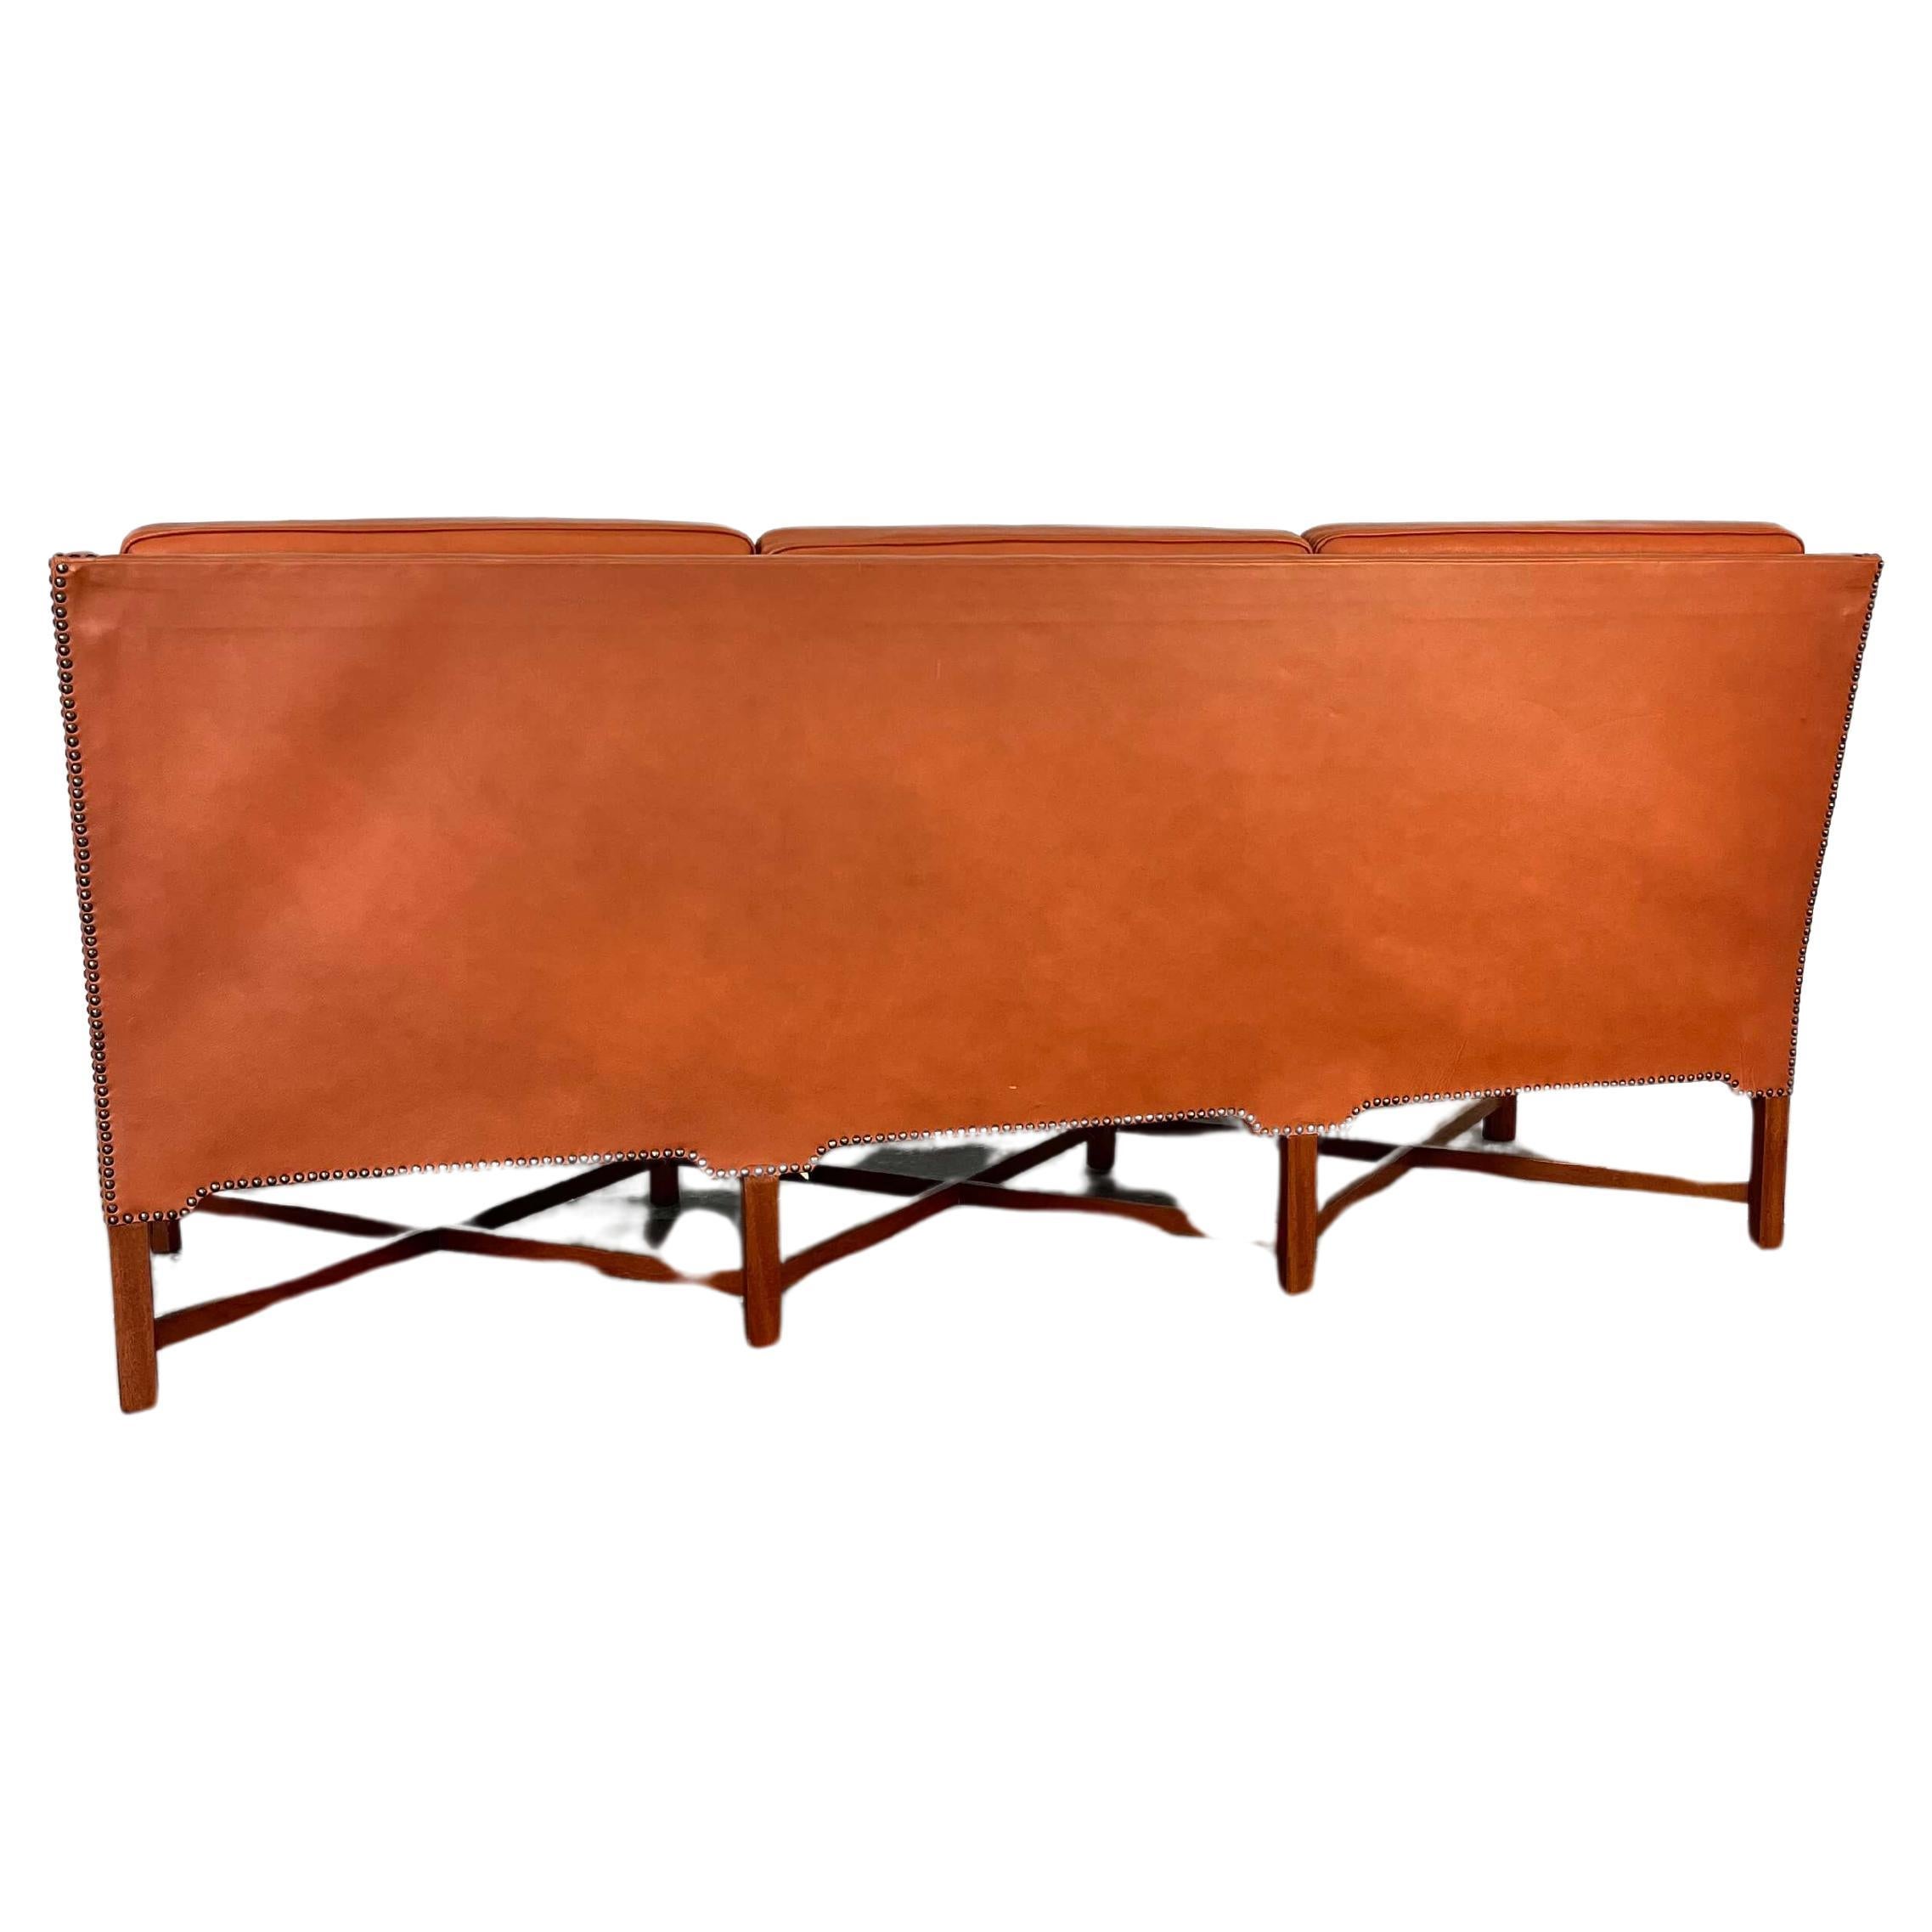 Kaare Klint Sofa Model 4118 in Leather and Mahogany In Good Condition For Sale In San Diego, CA